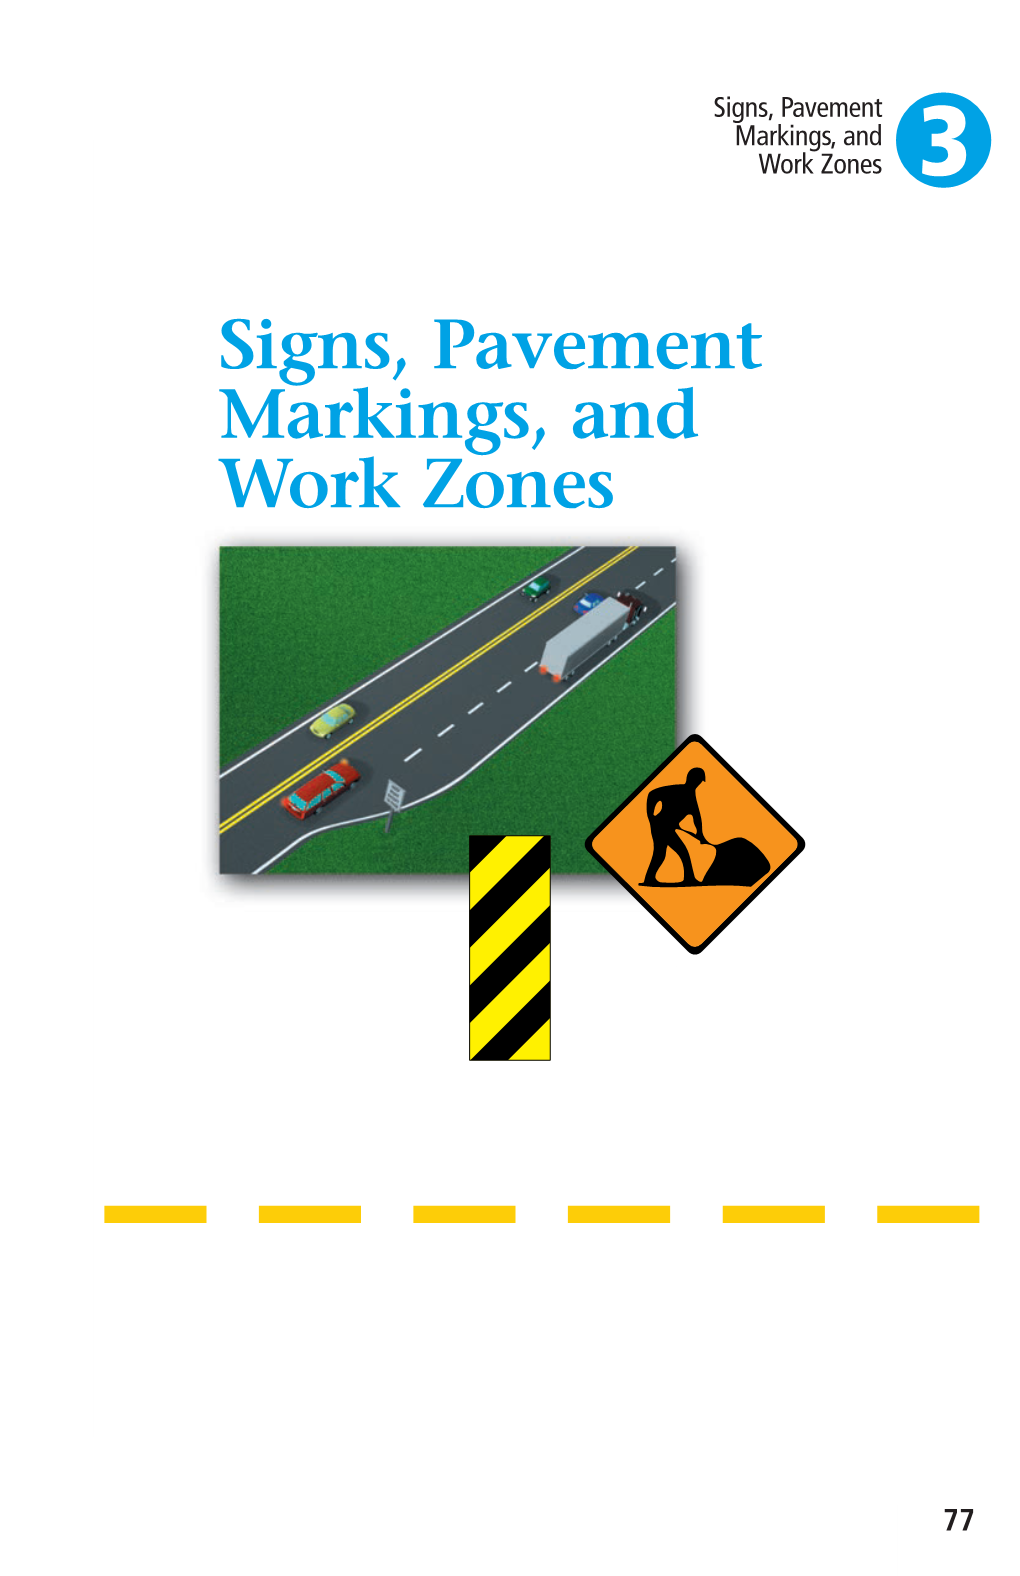 Signs, Pavement Markings and Work Zones